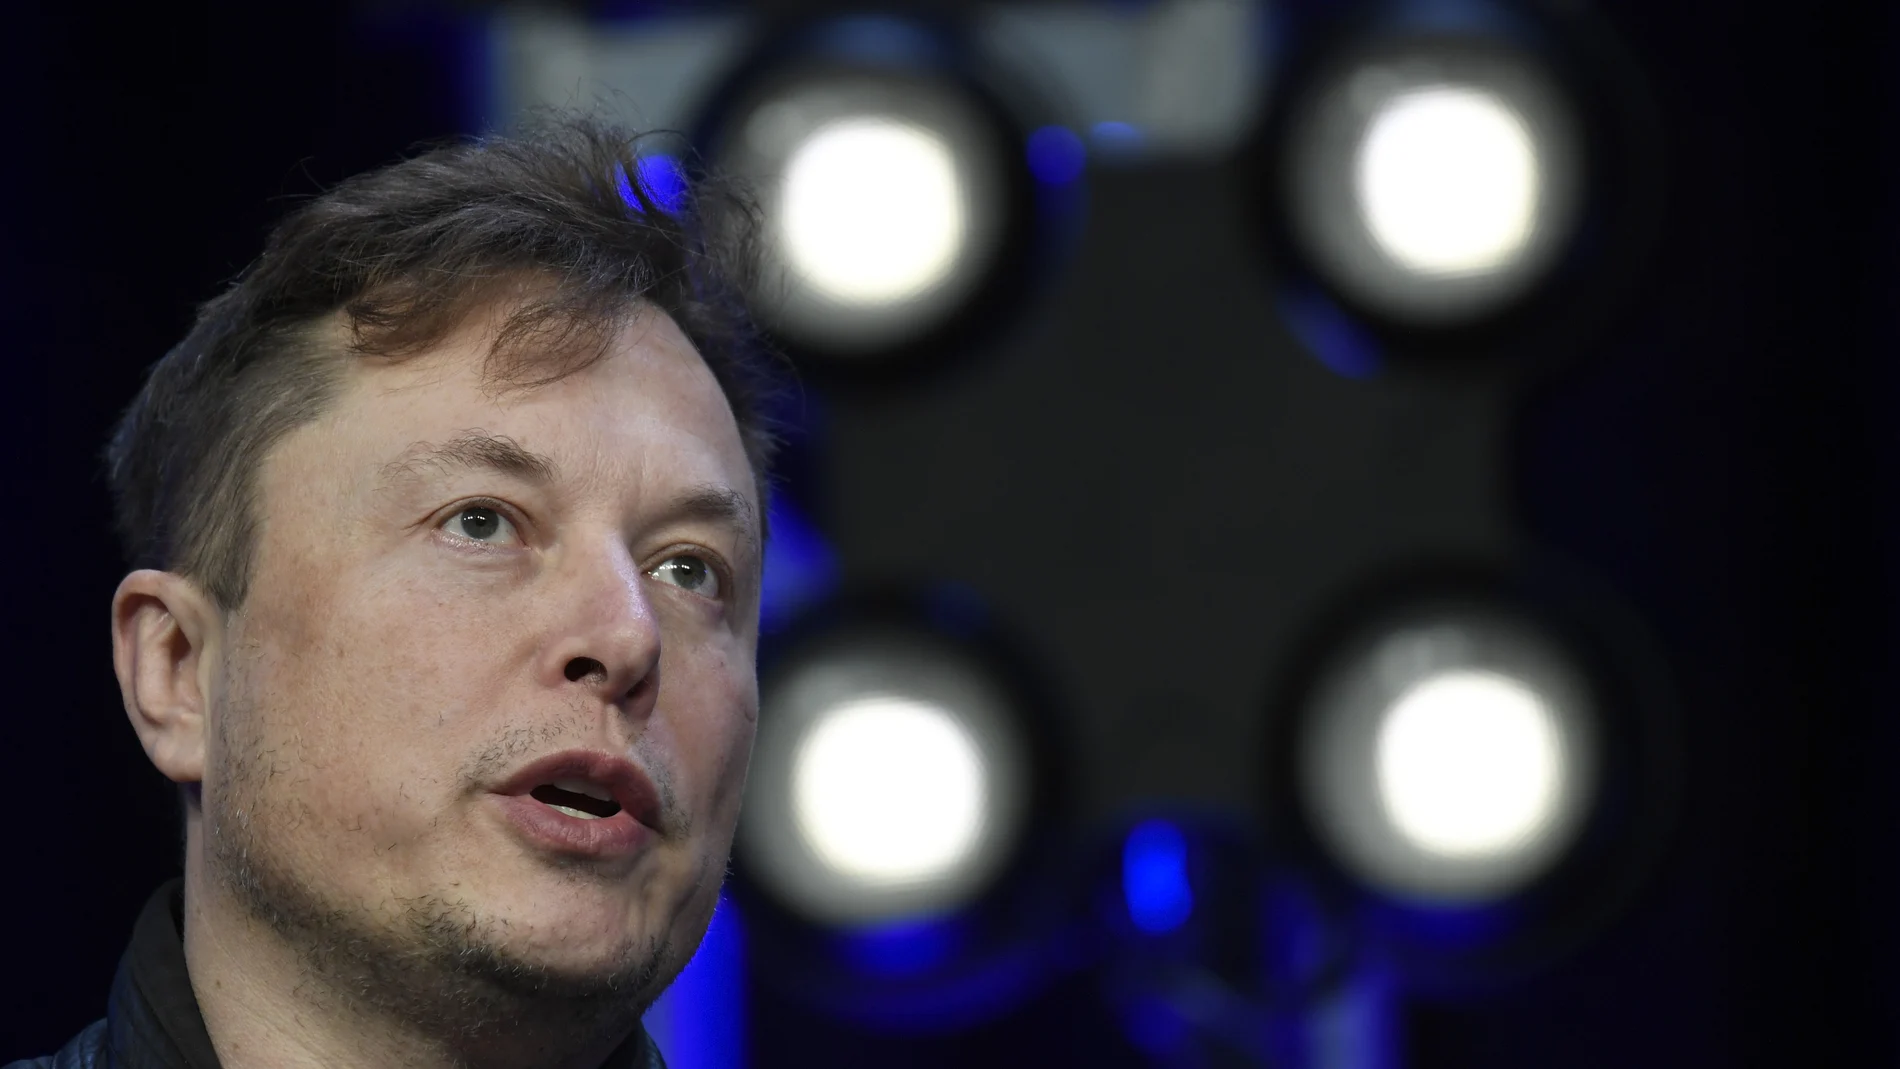 FILE - Tesla and SpaceX CEO Elon Musk speaks at the SATELLITE Conference and Exhibition in Washington, March 9, 2020. Twitter said Tuesday, July 12, 2022, it has sued Musk to force him to complete the $44 billion acquisition of the social media company. (AP Photo/Susan Walsh, File)